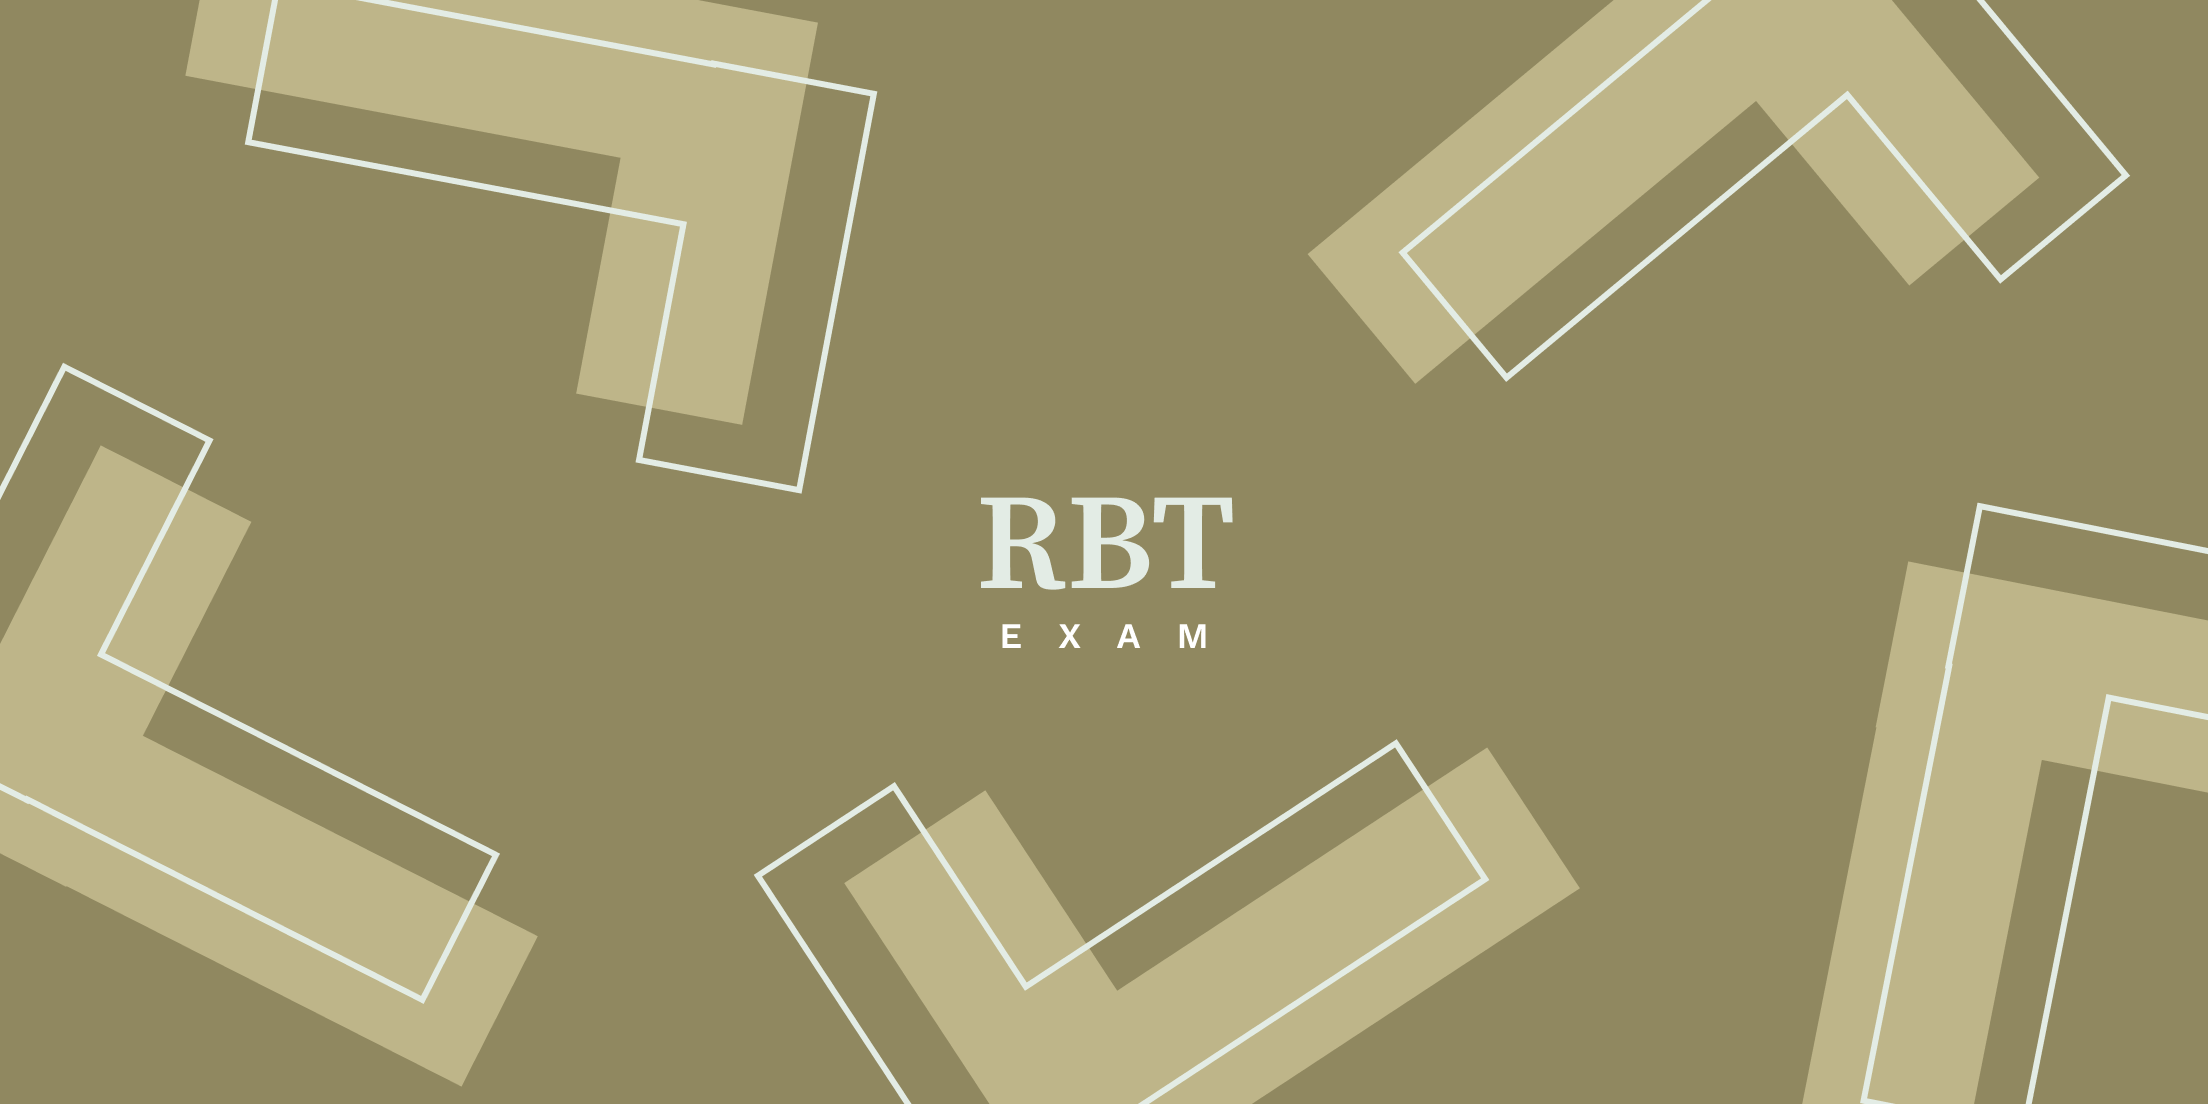 How to Pass the RBT Exam: Tips, Preparation & More